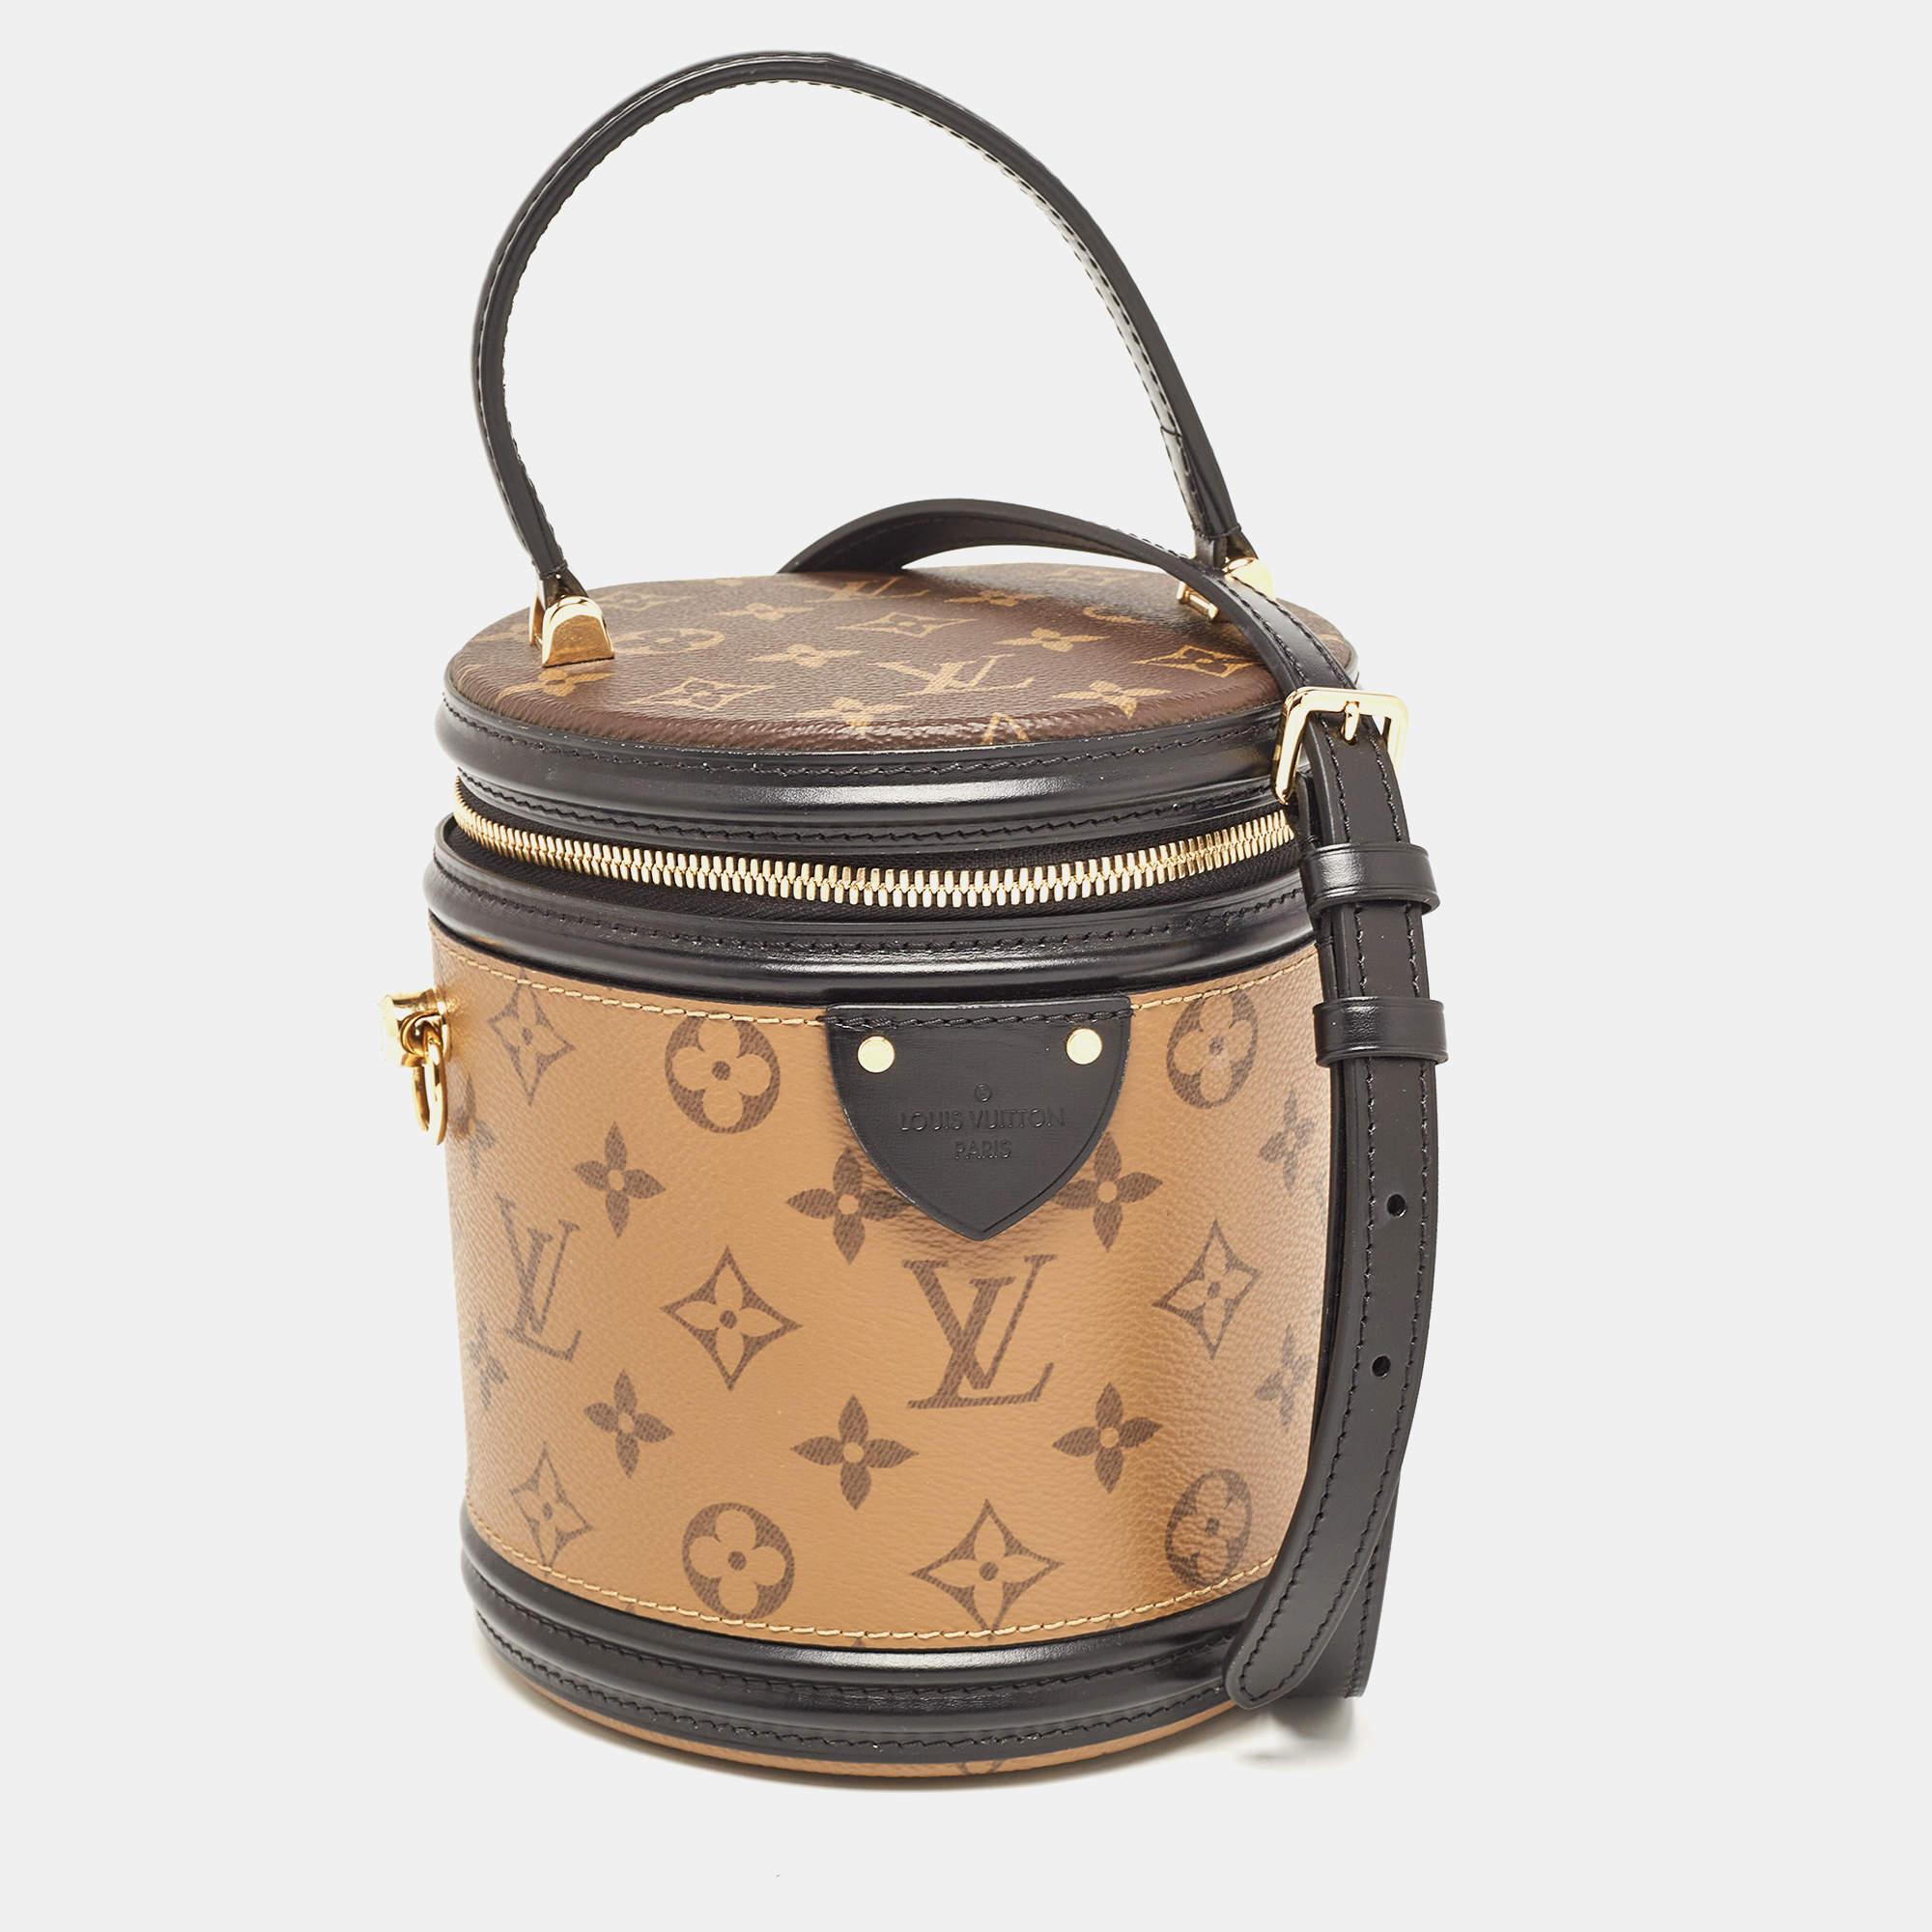 Featuring the LV Cannes beauty case's historical shape, designer Nicolas Ghesquière revives a long-standing classic with this Cannes bag. This elegant piece reimagines a traditional silhouette steeped in Louis Vuitton's heritage. Crafted from